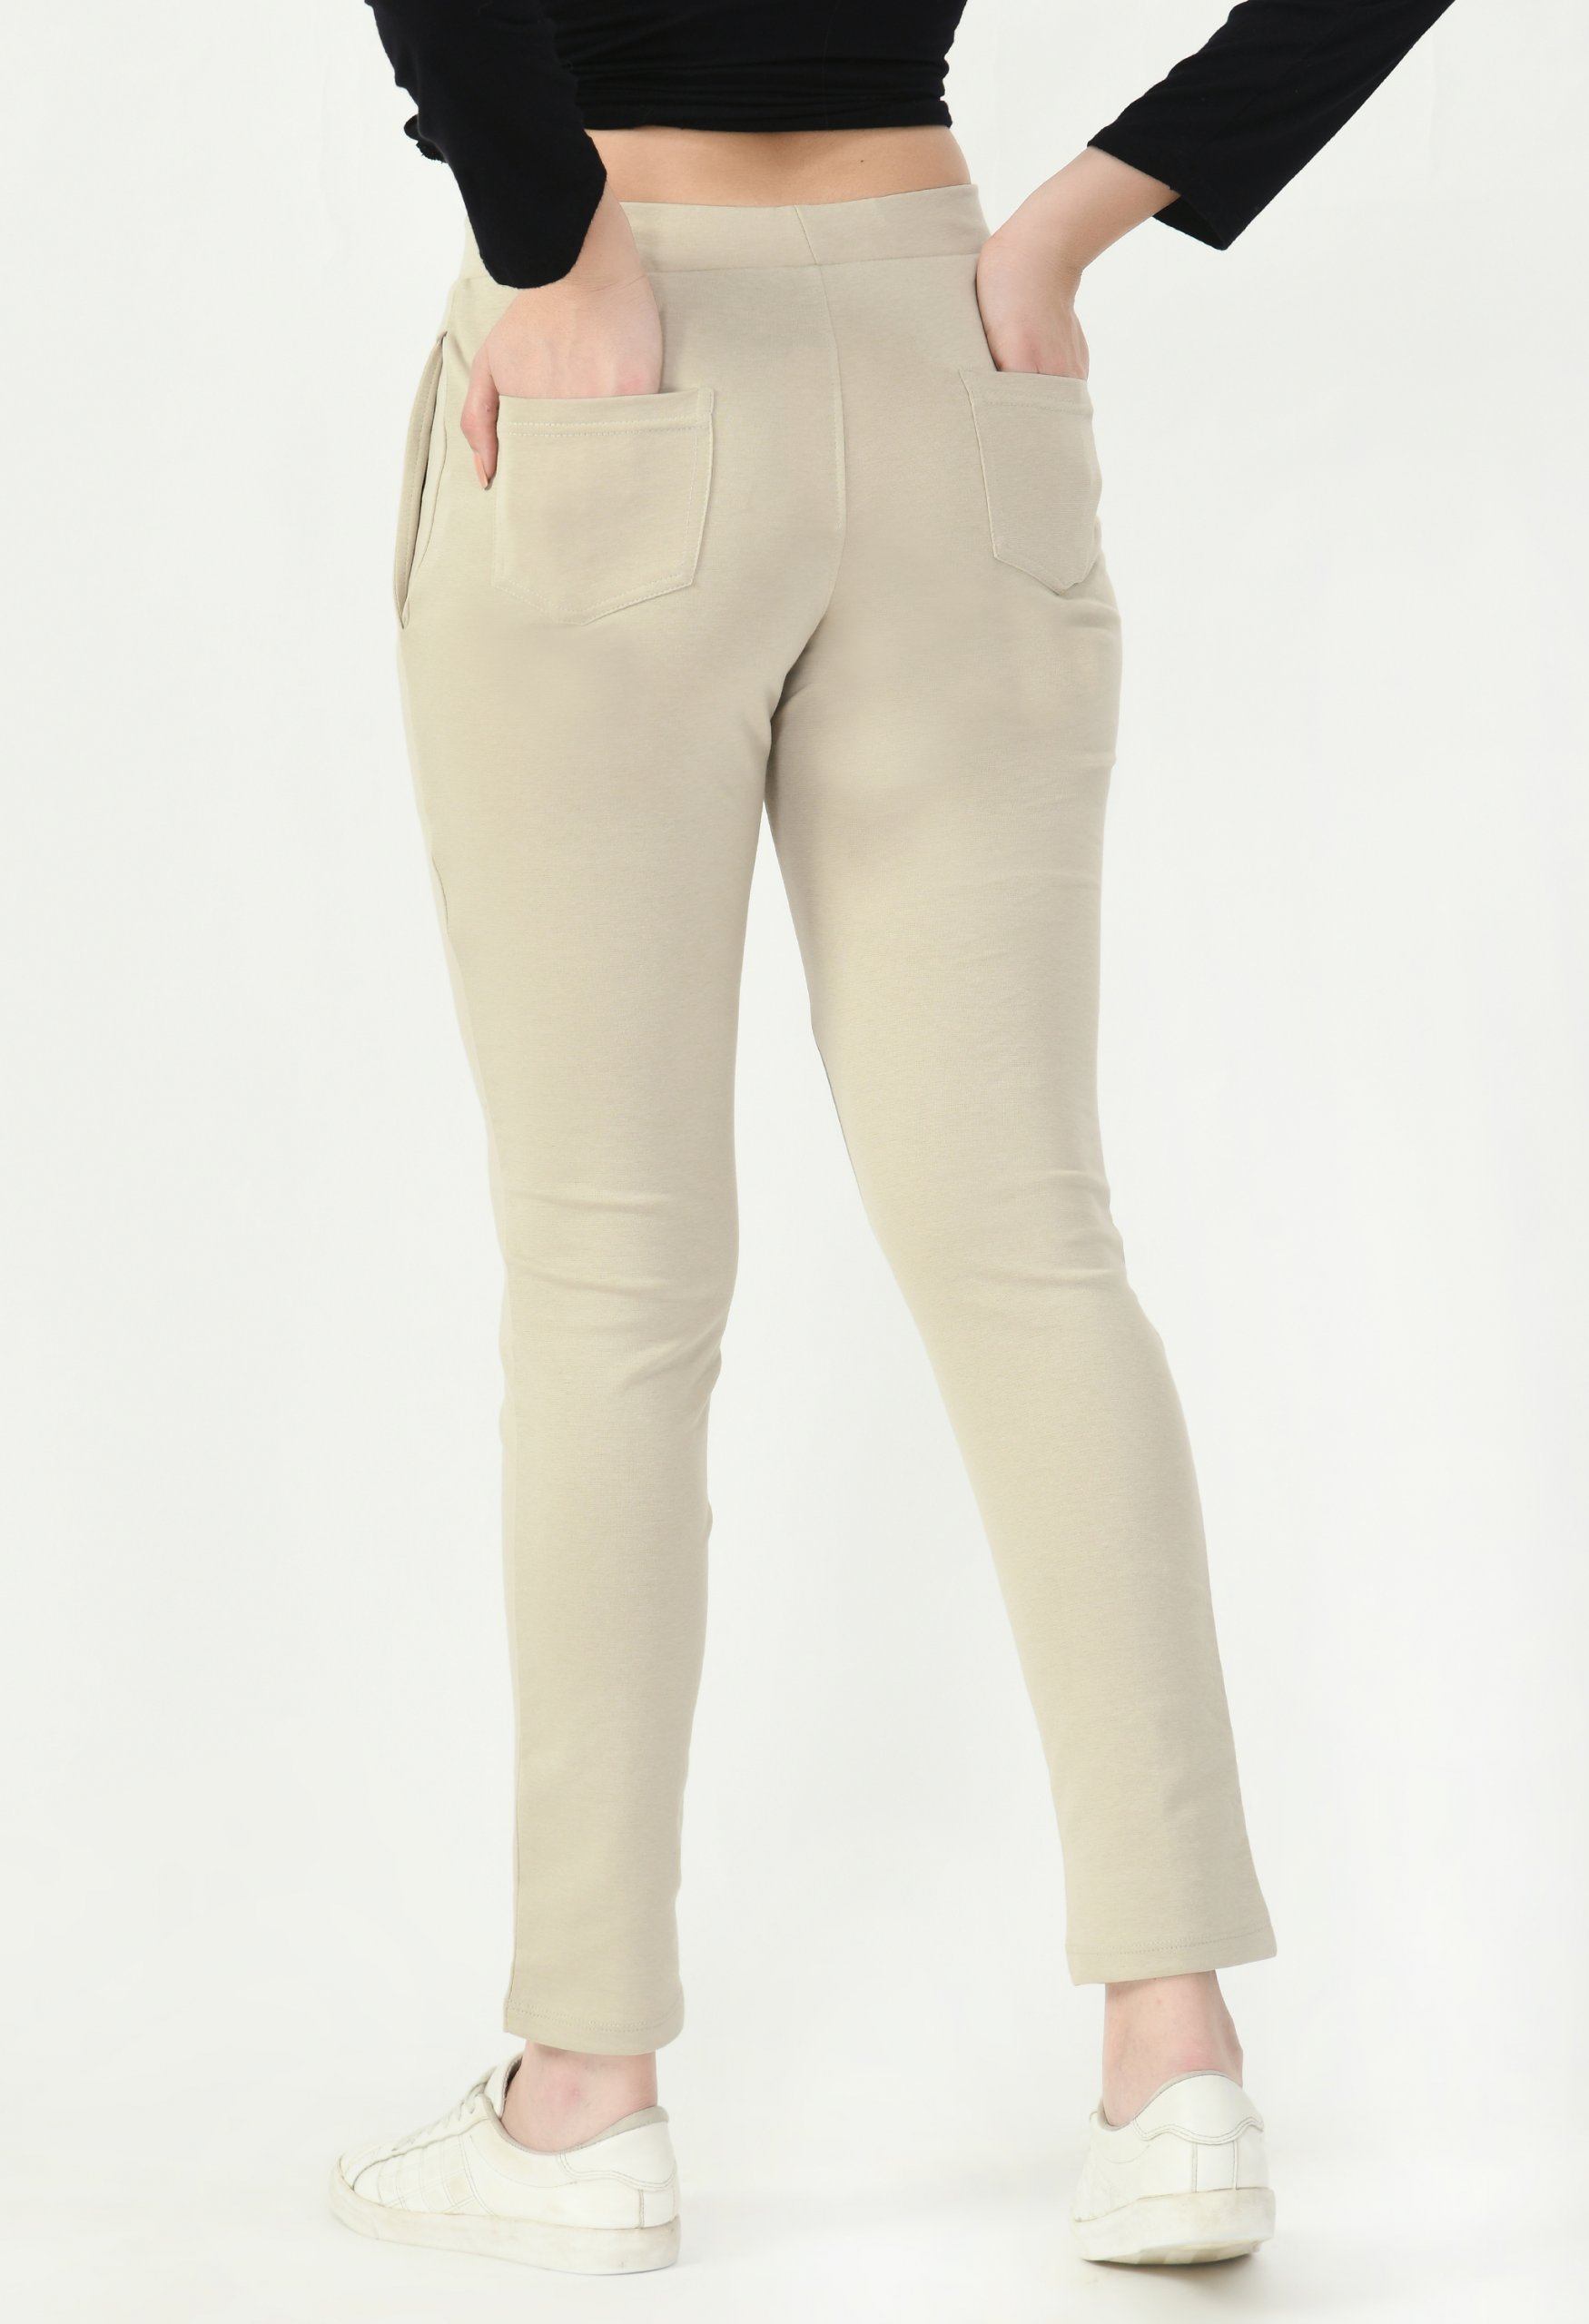 Yellow Coloured Trouser by Deerdo